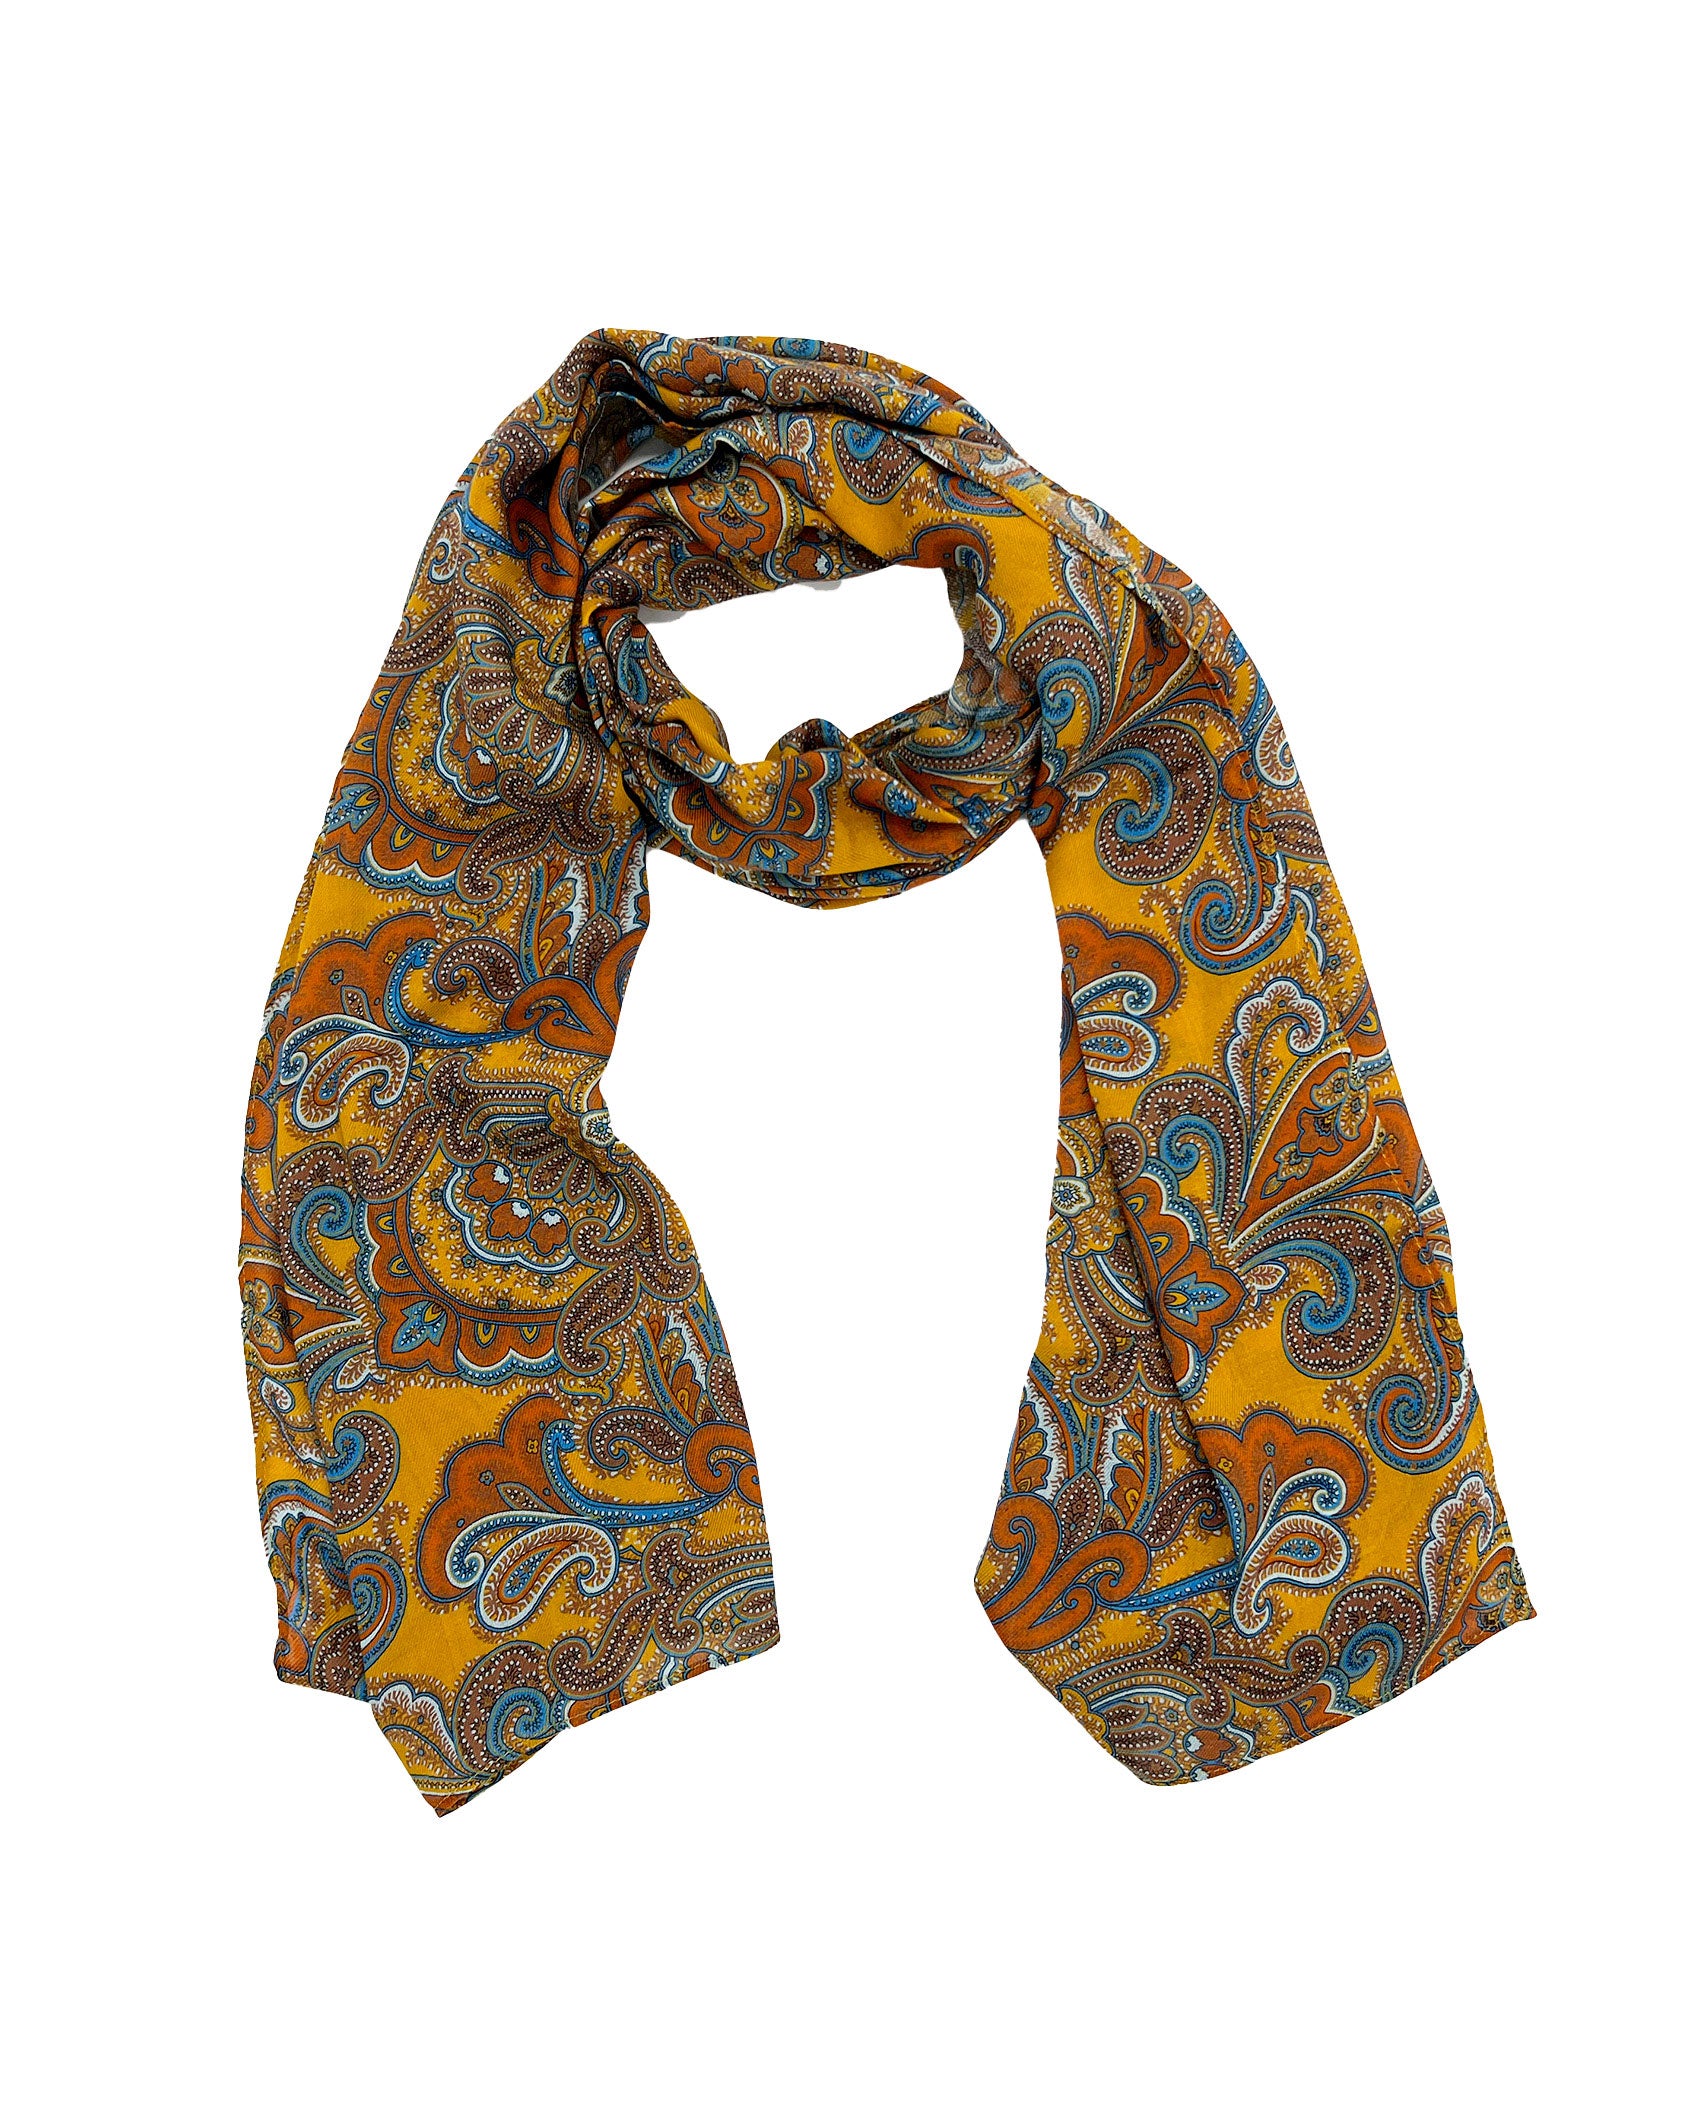 The Carnaby wide scarf unravelled and looped in the middle, demonstrating the considerable length and showing the paisley patterns on a golden ground.